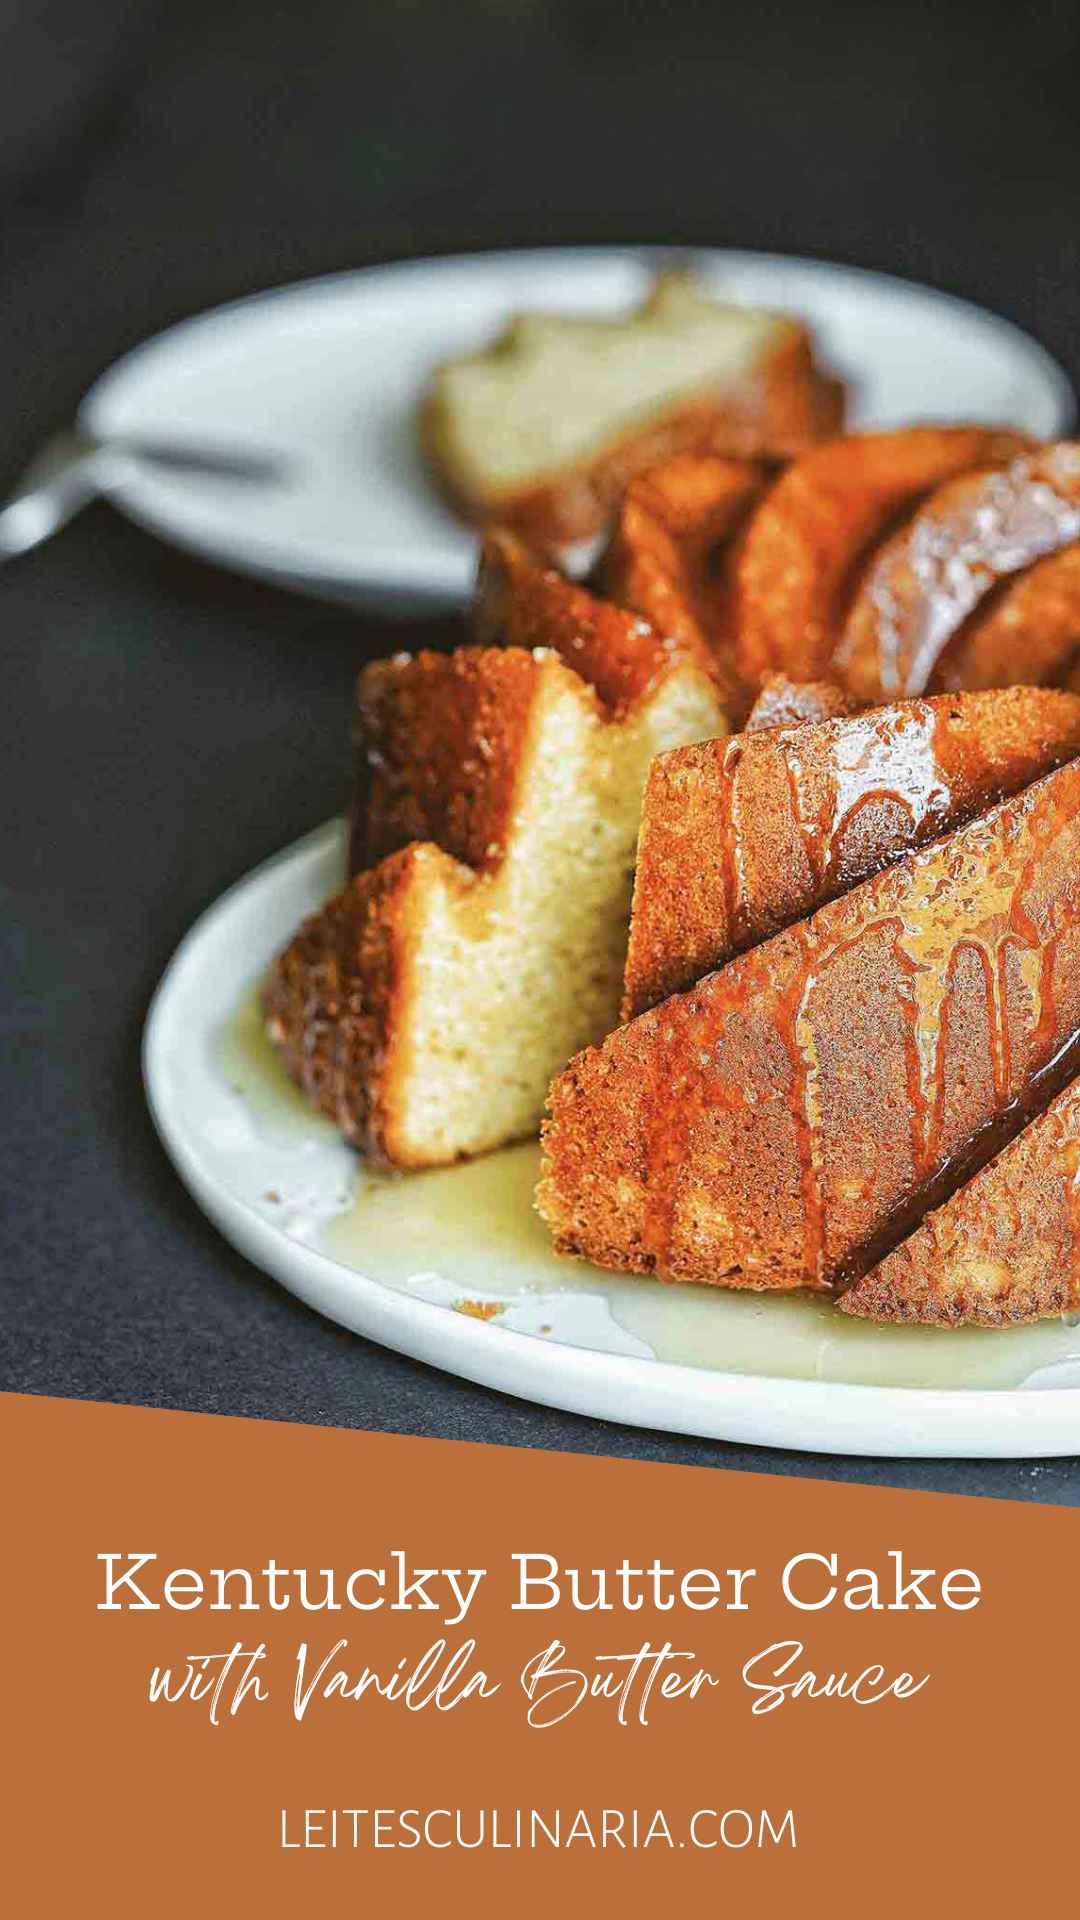 A Kentucky butter cake on a platter with glazed drizzled over it and one slice cut from it.